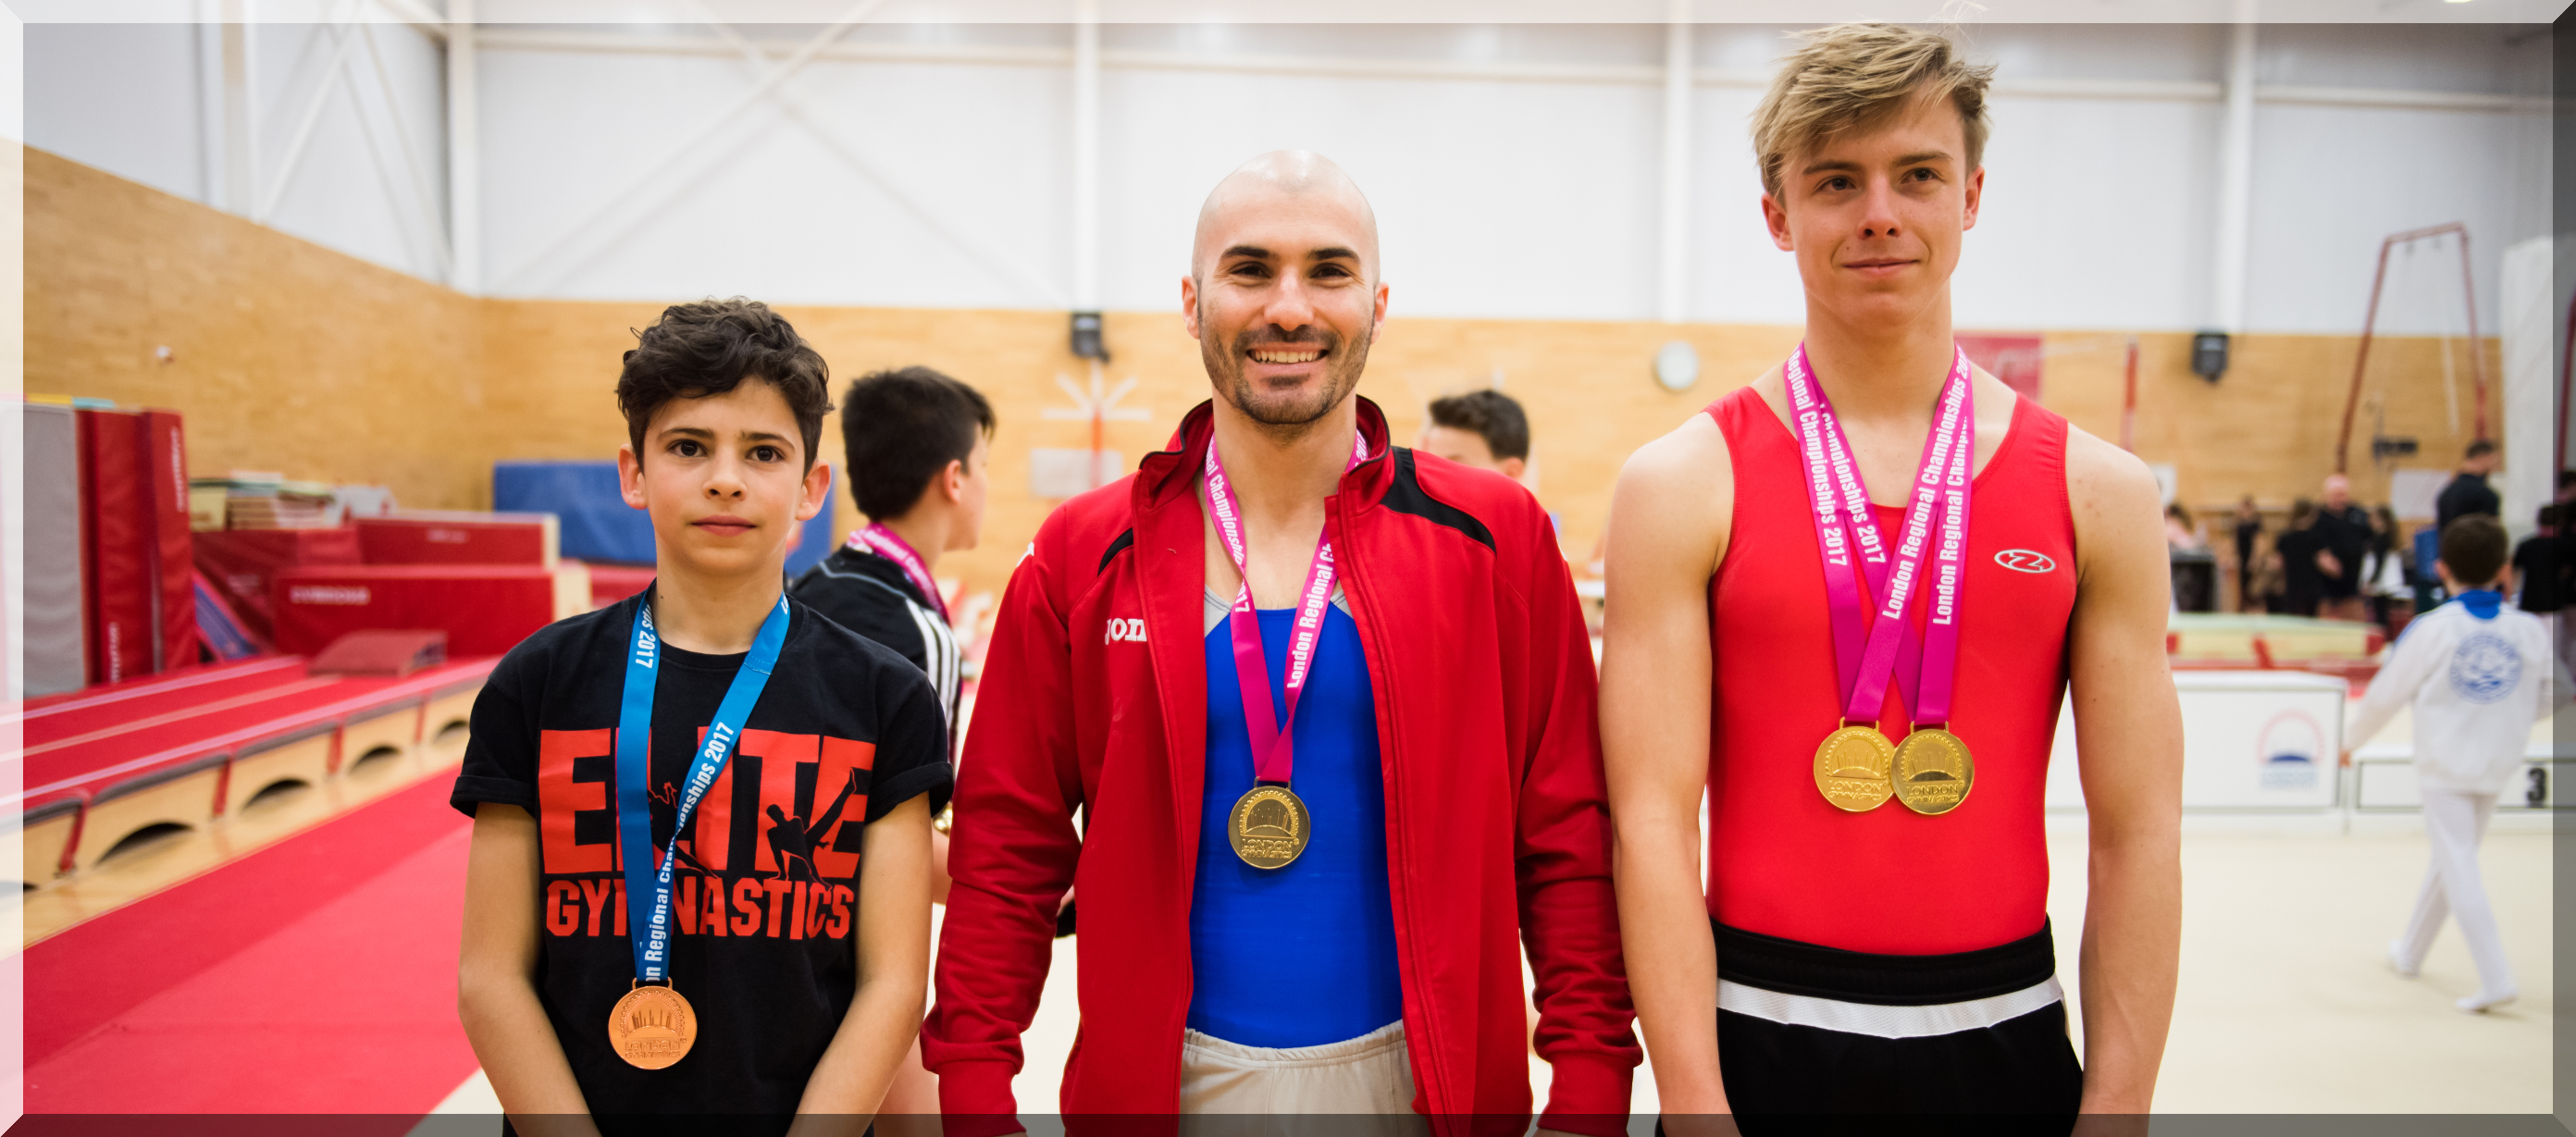 Coach Stefan at the 2017 London Regional Championships